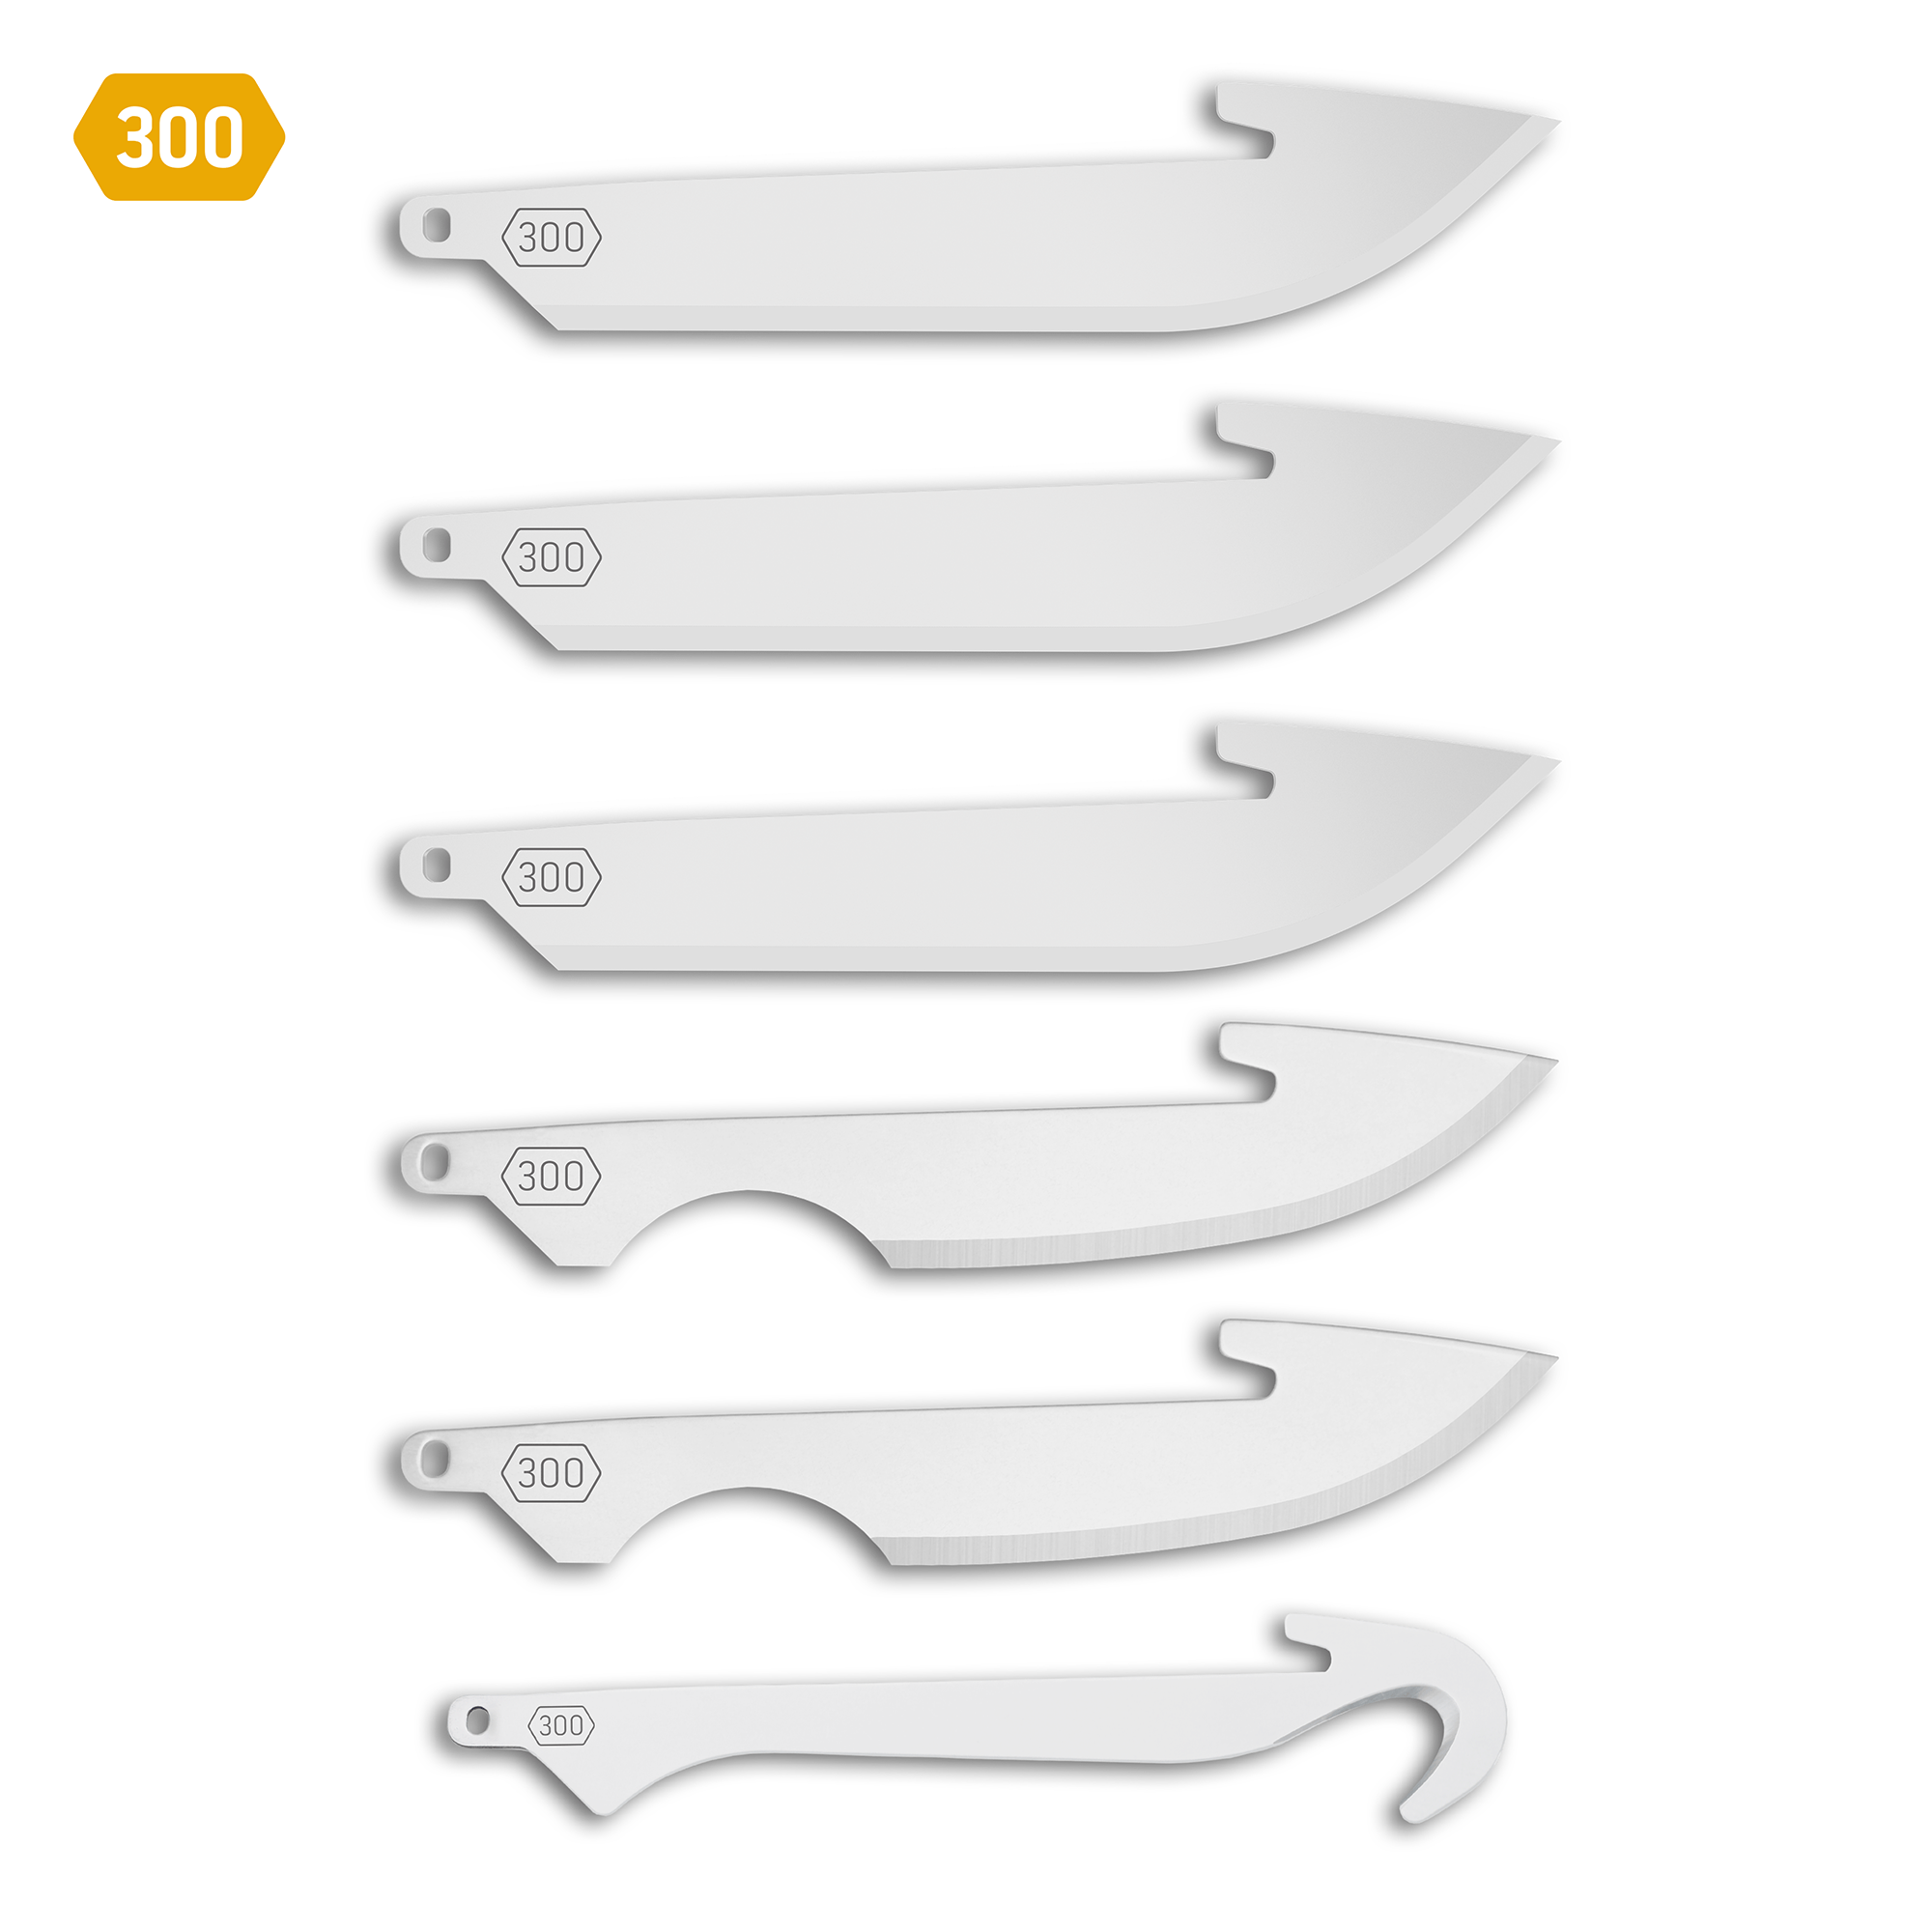 300 (3.0) Combo Replacement Blades Set 6-Pack - Stainless